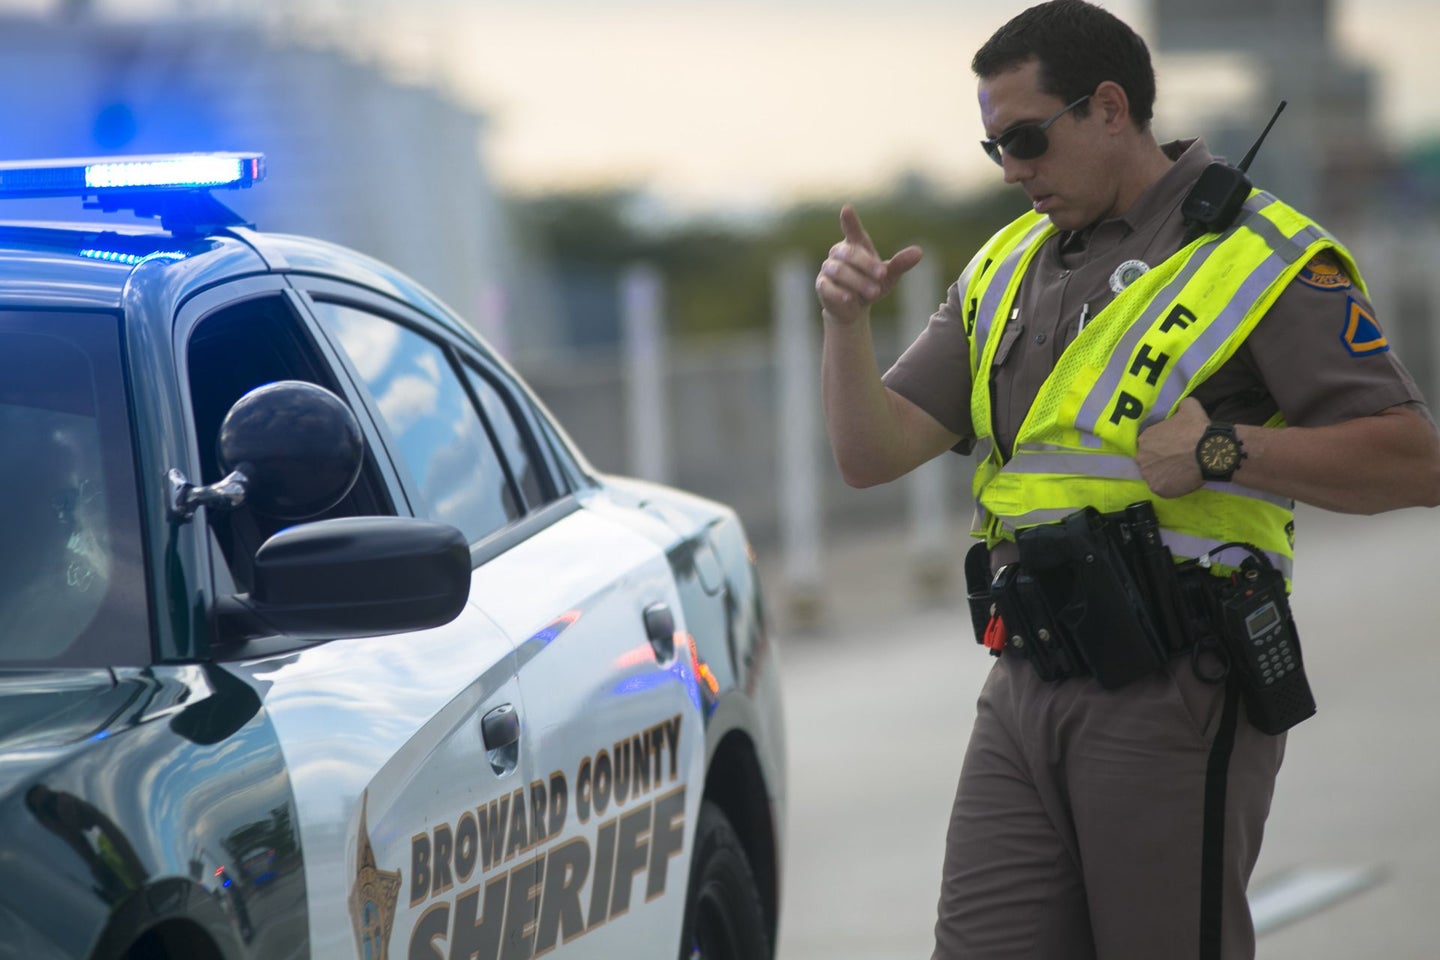 Florida Highway Patrol Troopers to Carry Antidote for Opioid Overdoses